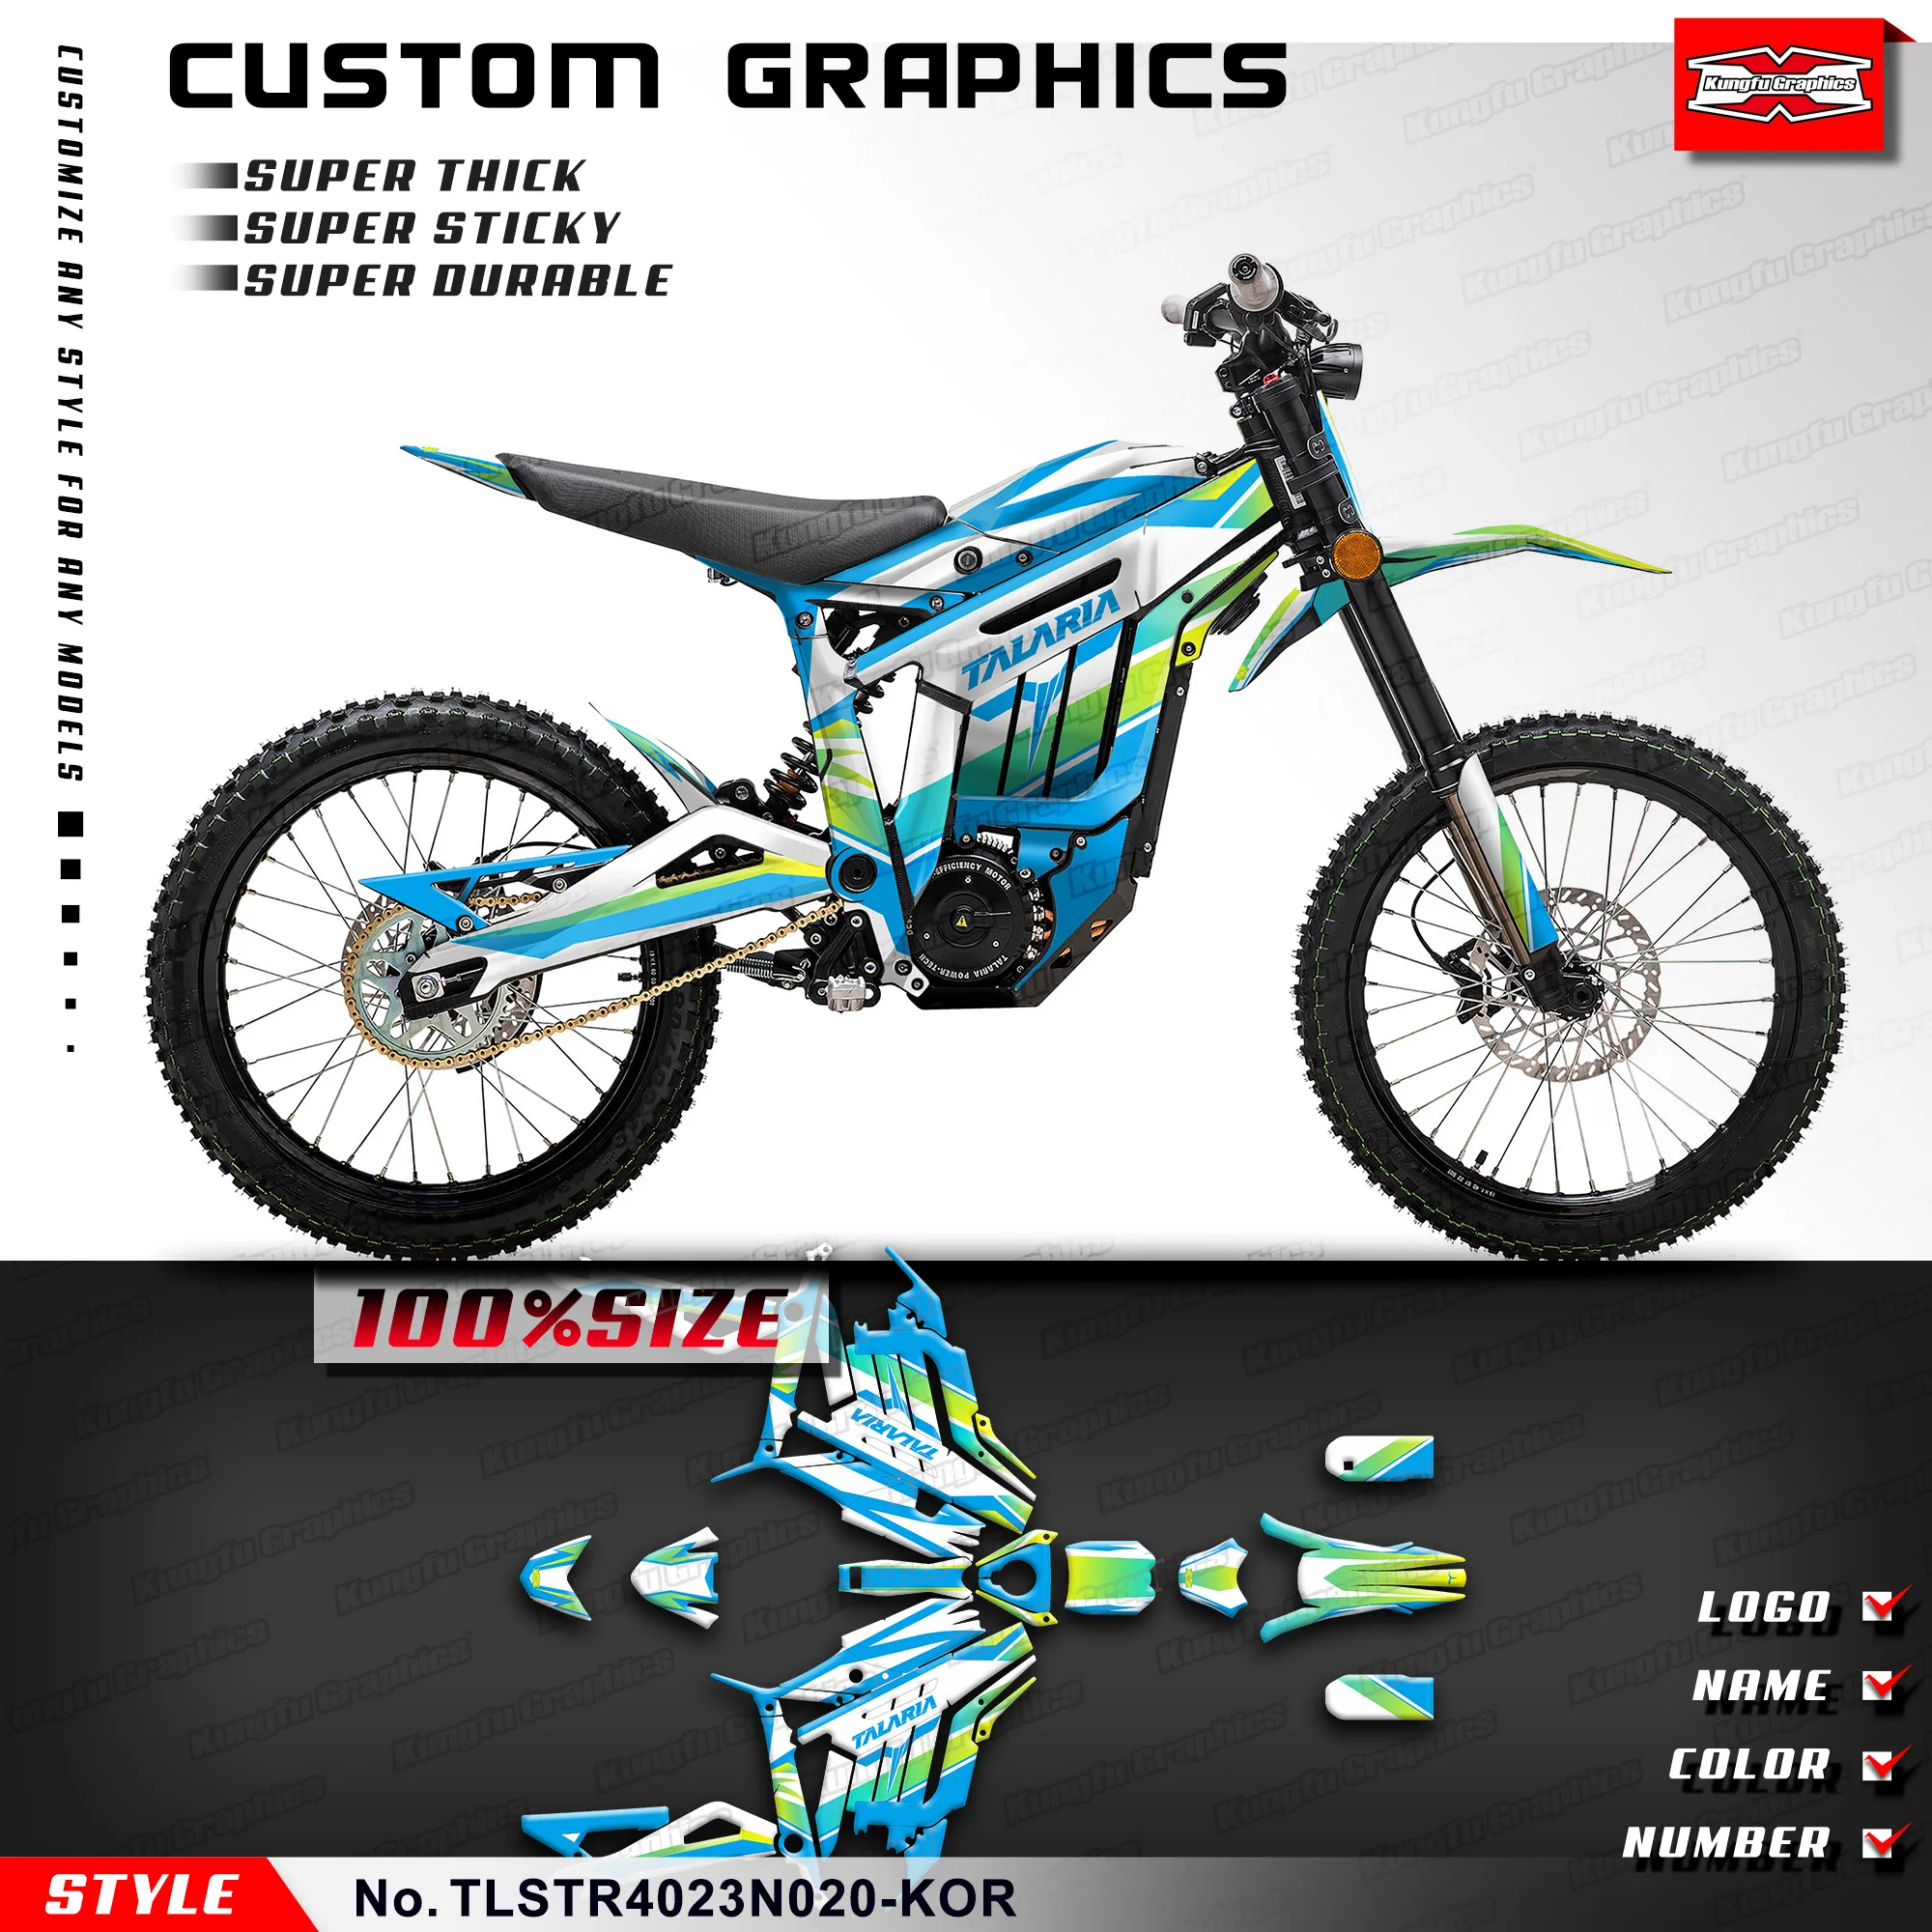 KUNGFU GRAPHICS Restyle Stickers Motocross Decal Kit for TALARIA Sting R MX L1E SX3 Dirt eBike sting 57th